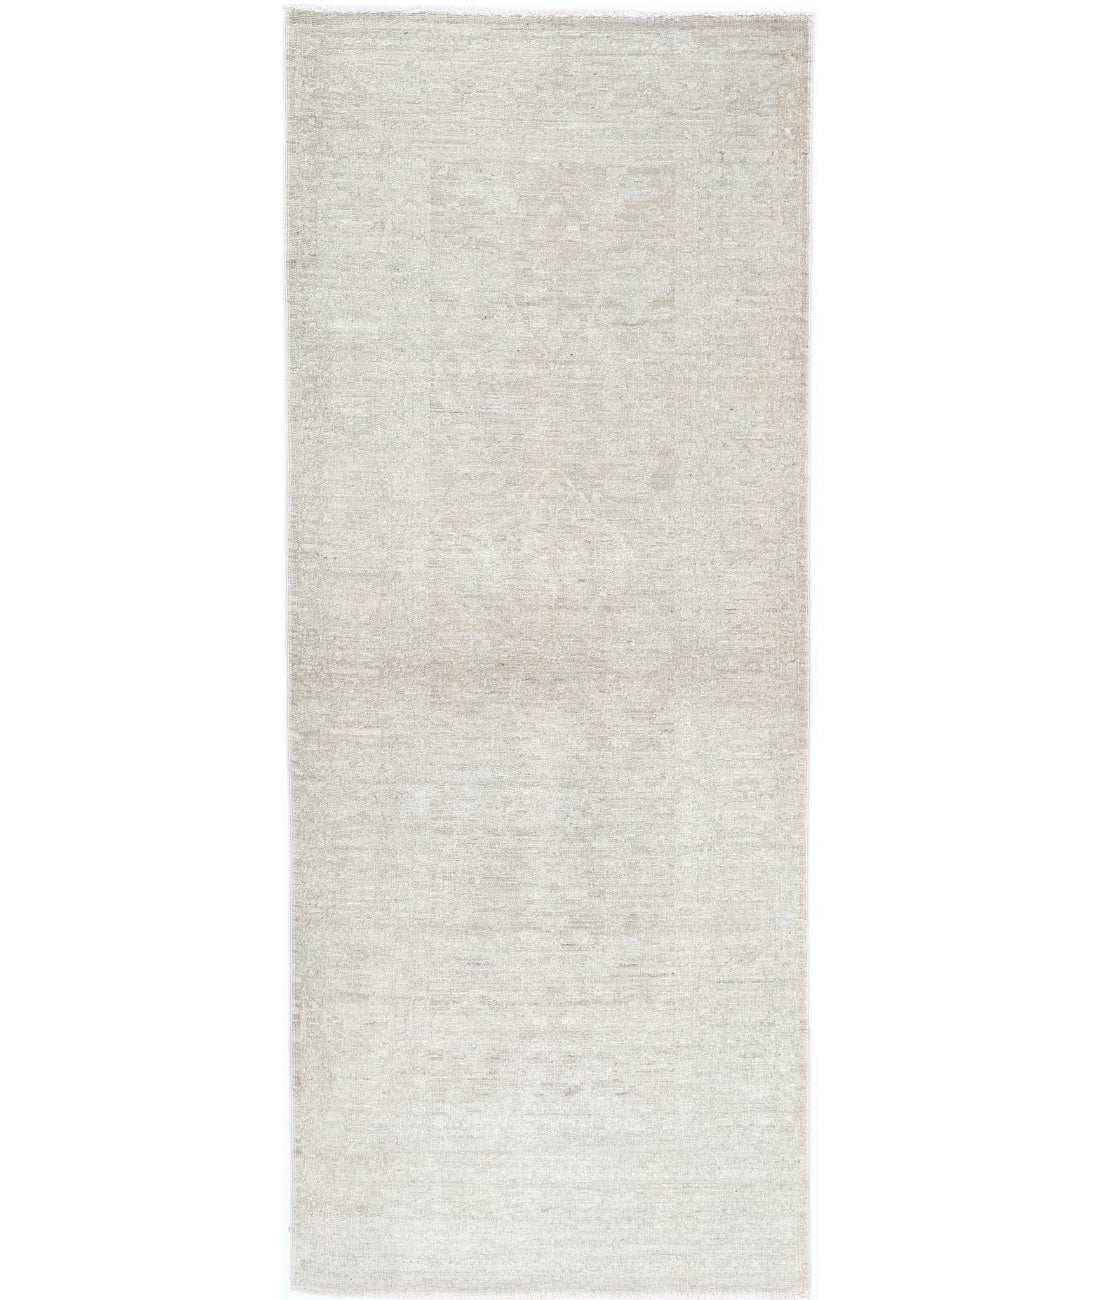 Hand Knotted Overdye Wool Rug - 2'6'' x 6'3'' 2'6'' x 6'3'' (75 X 188) / Gold / Gold